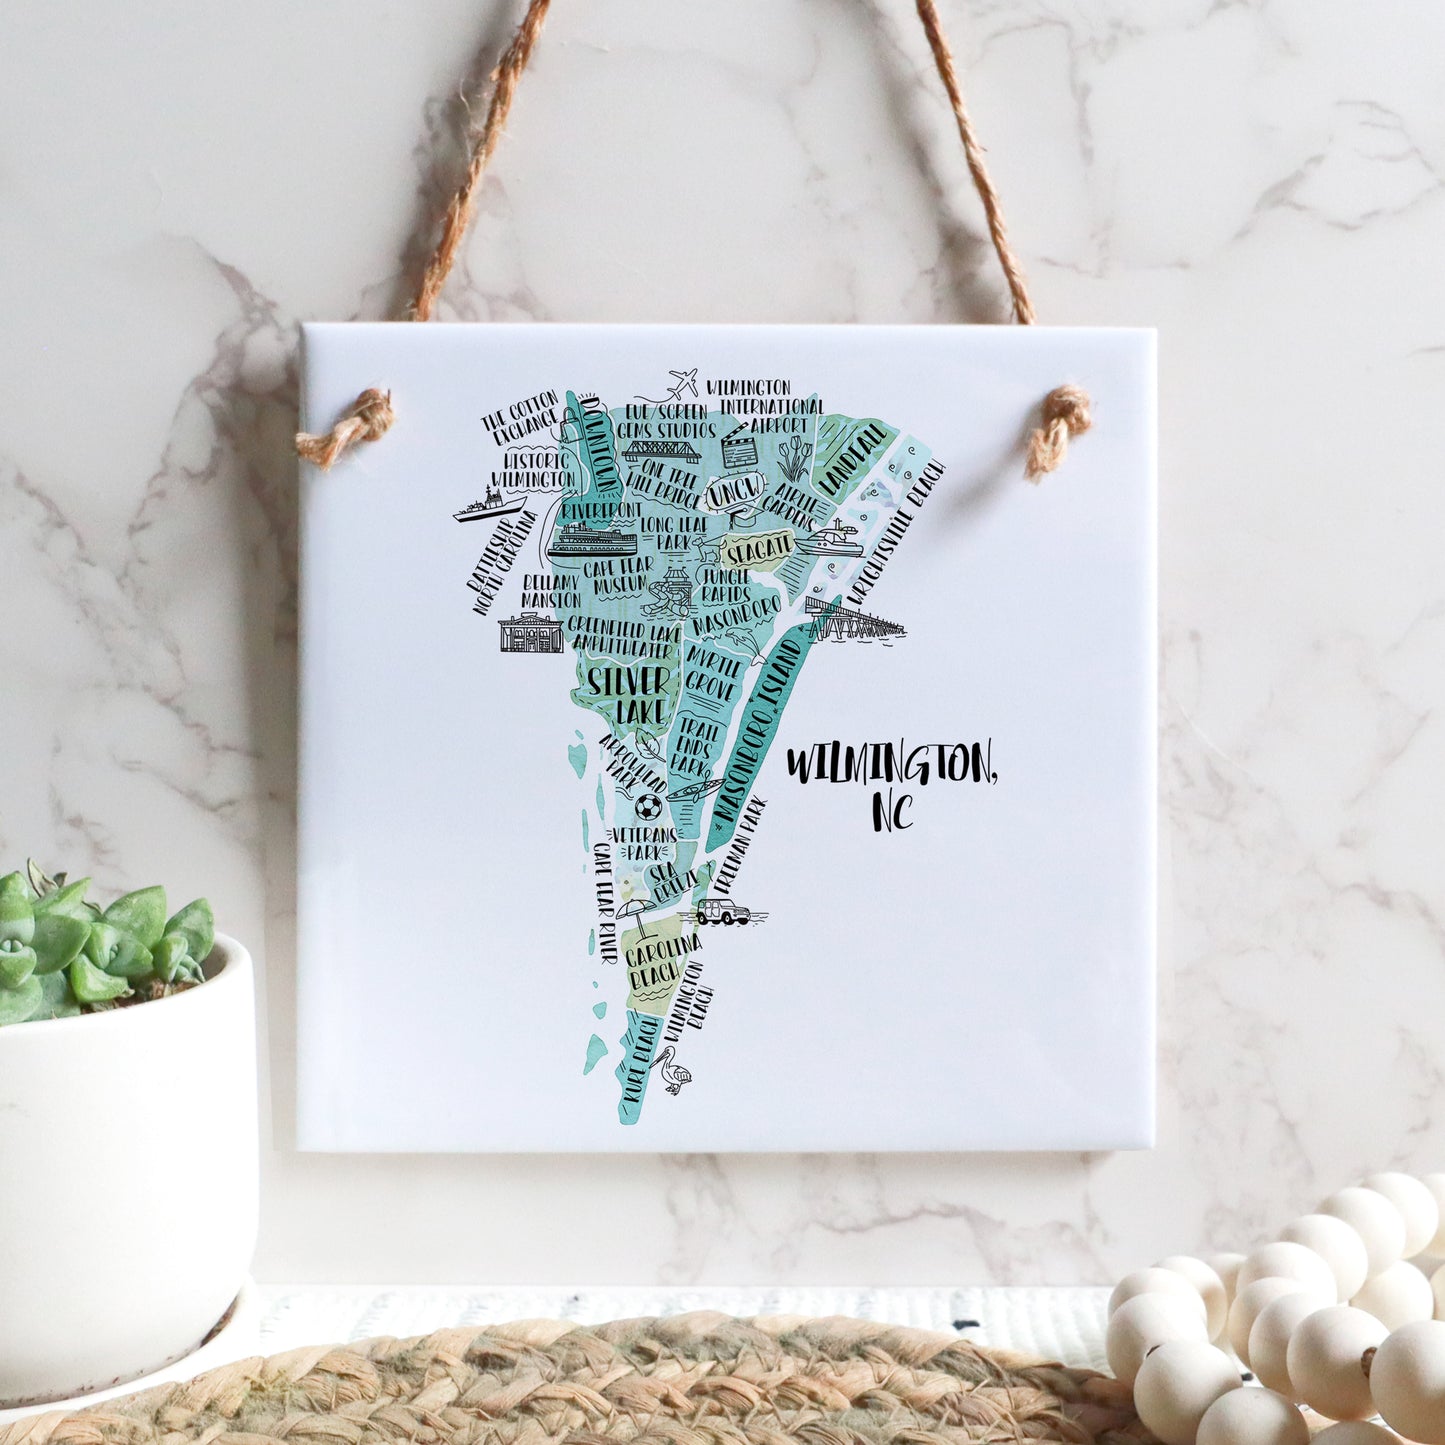 A hand-drawn tourist map of Wilmington North Carolina on a square tile sign hanging on a wall - in the color teal